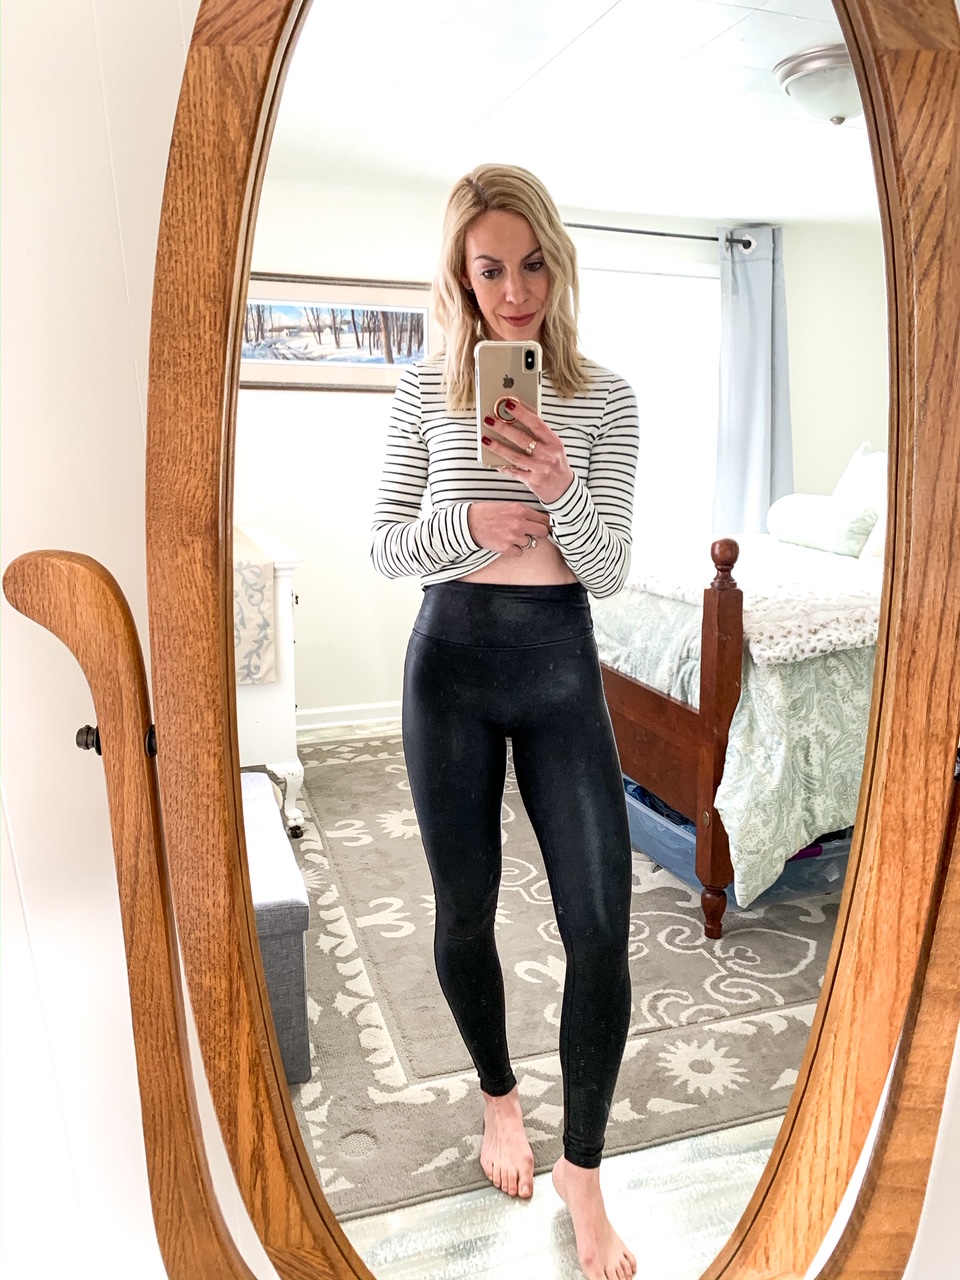 commando faux leather leggings review - how to wear faux leather